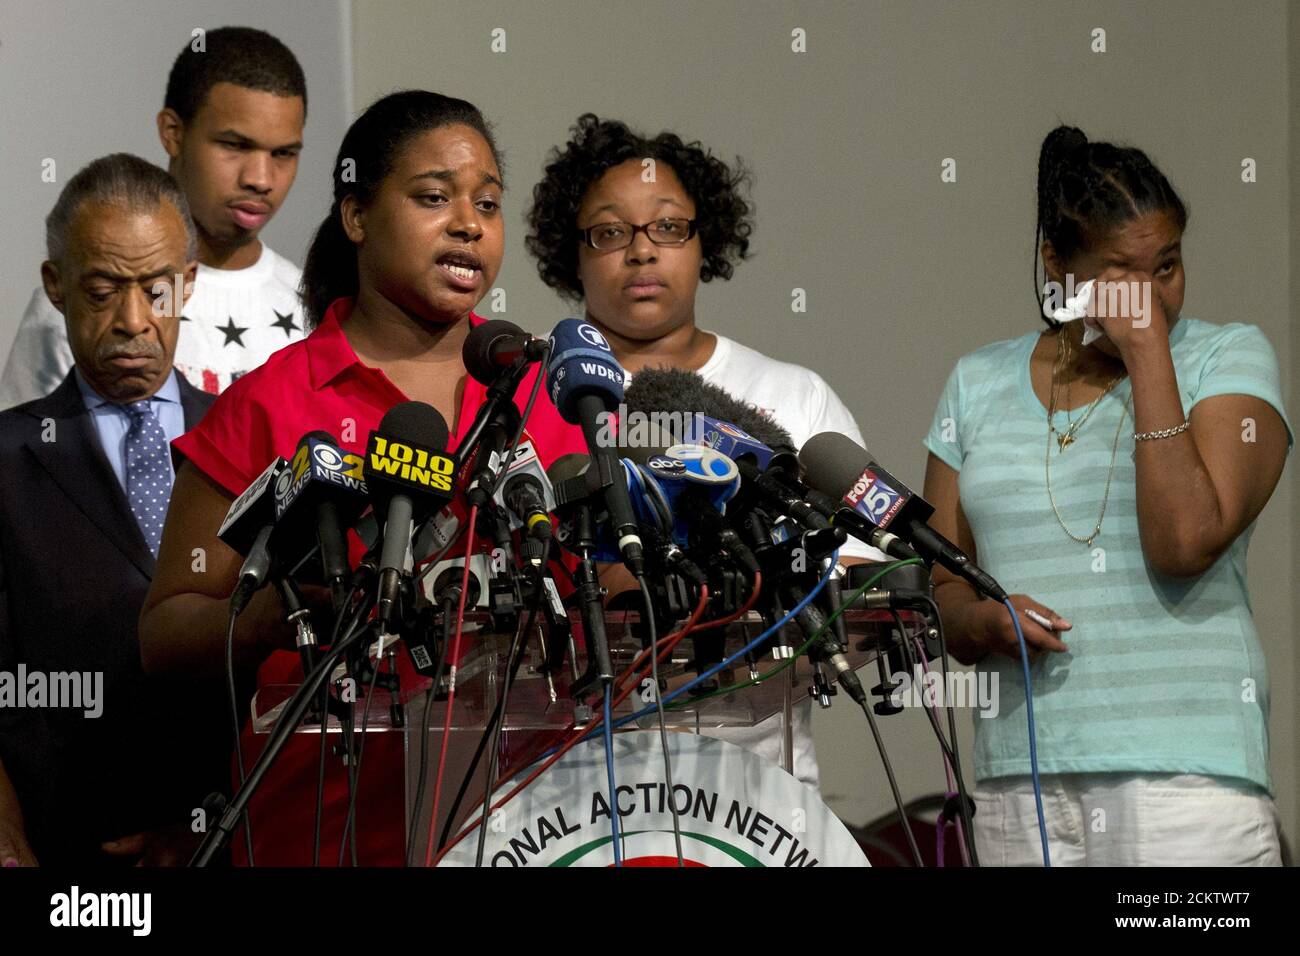 Erica Garner, daughter of Eric Garner, speaks during a news conference at the National Action Network in New York July 14, 2015. One day after settling a $5.9 million wrongful death case with New York City, the family of Eric Garner renewed calls to criminally charge the police officer who put him in a fatal chokehold last July. REUTERS/Brendan McDermid Stock Photo